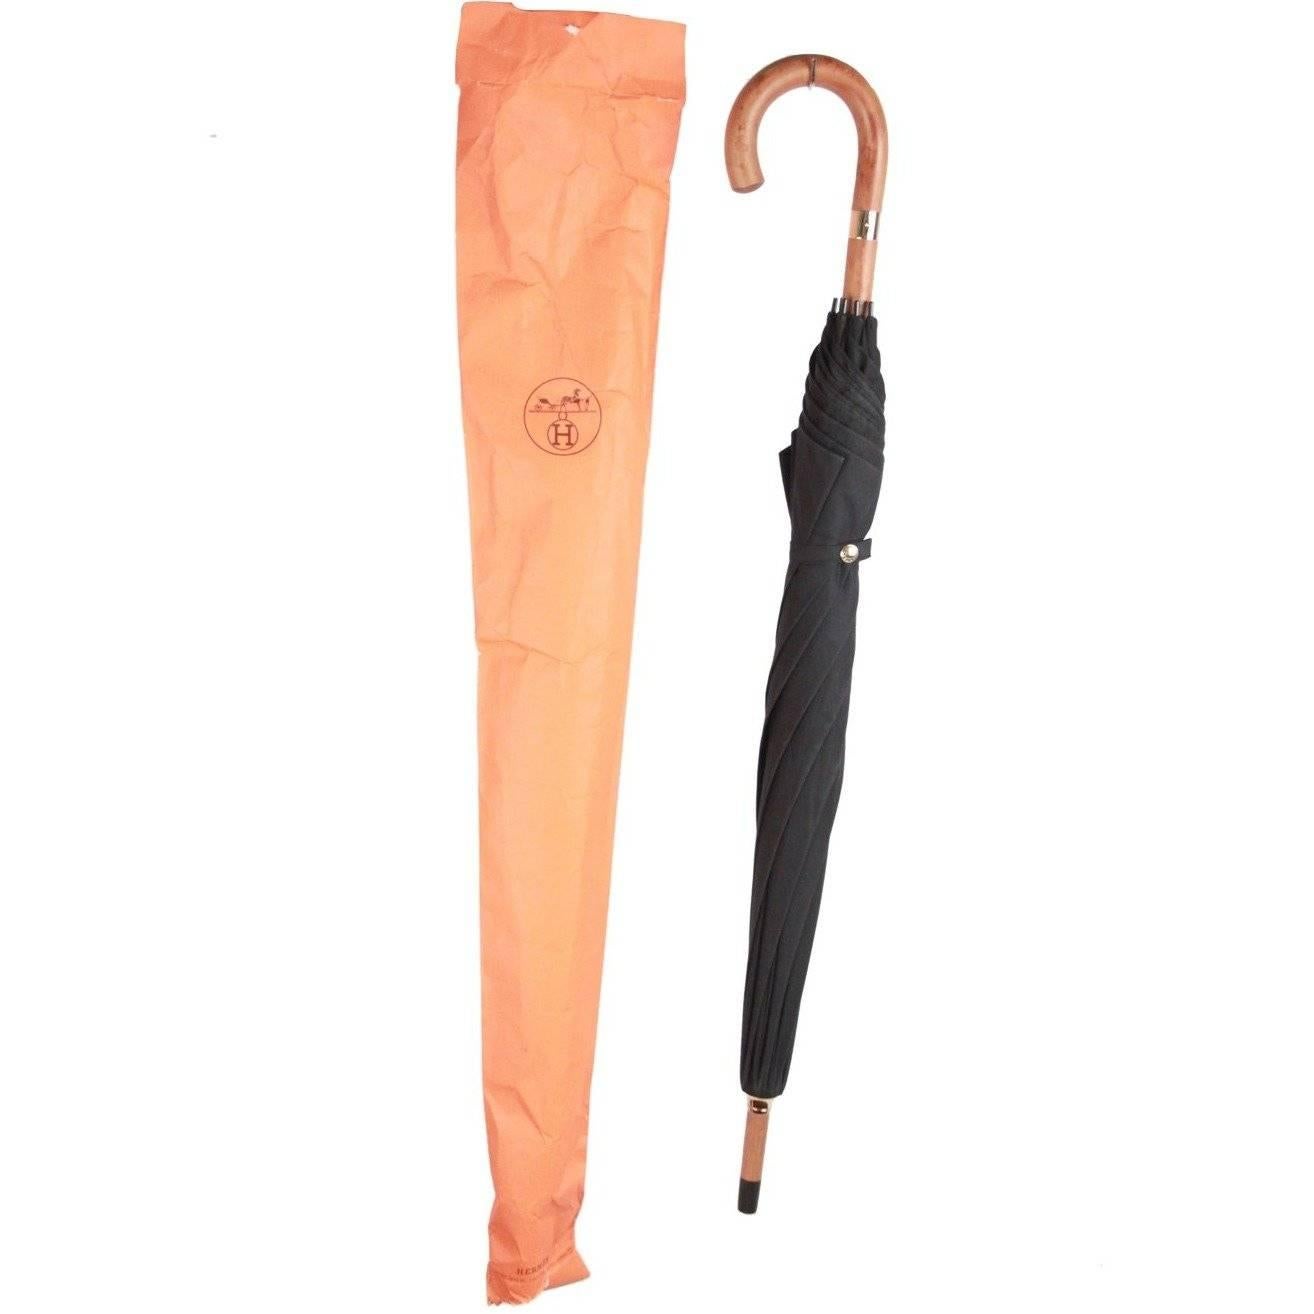 - HERMES cane umbrella - Black fabric - Light gold-metal hardware - Wood handle - Total lenght: 36 inches - 91,6 cm - Made in England Logos & Tags: 'HERMES Paris' embossed on the stick, HERMES tag, signed hardware